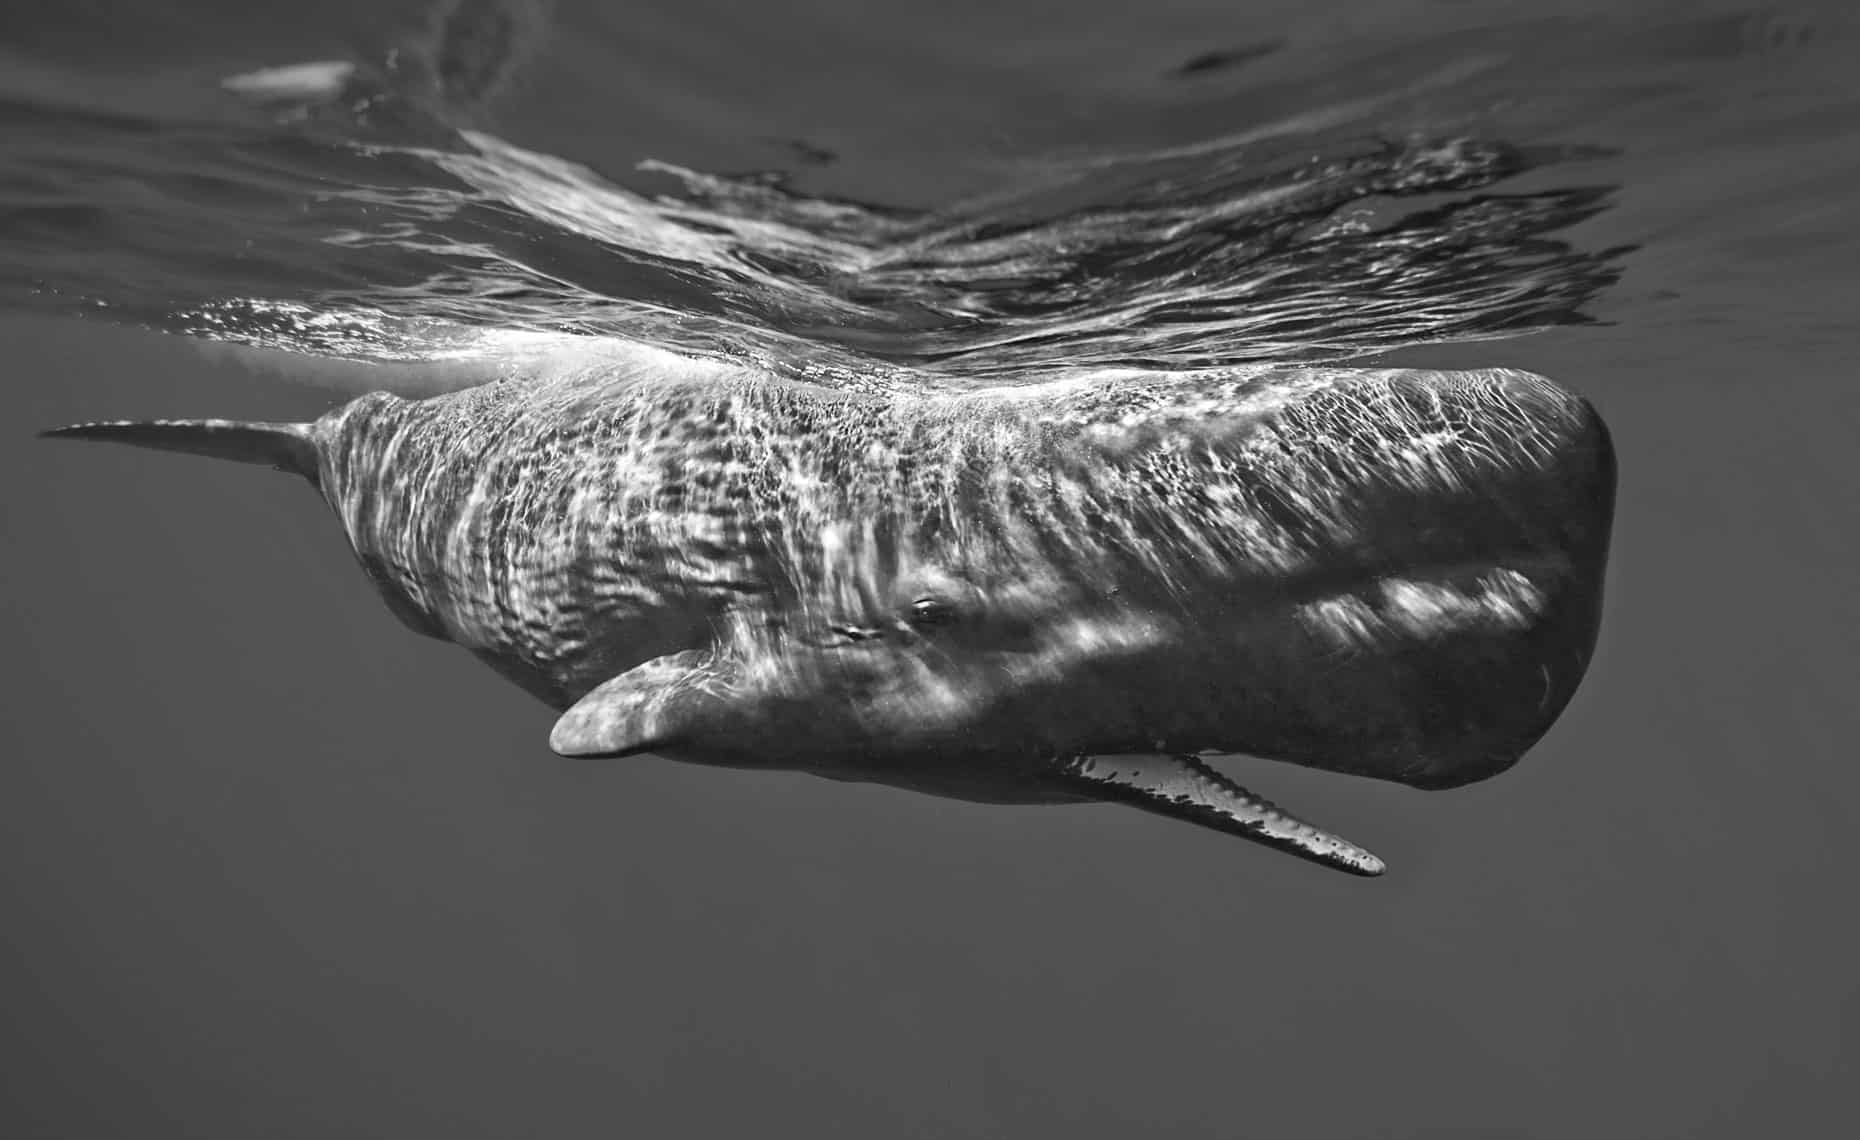 Sperm Whale ( Physeter Macrocephalus )
The Largest Toothed Whale And The Largest Brain Of Any Creature Known To Have Lived On Earth.
Taken Under Permit